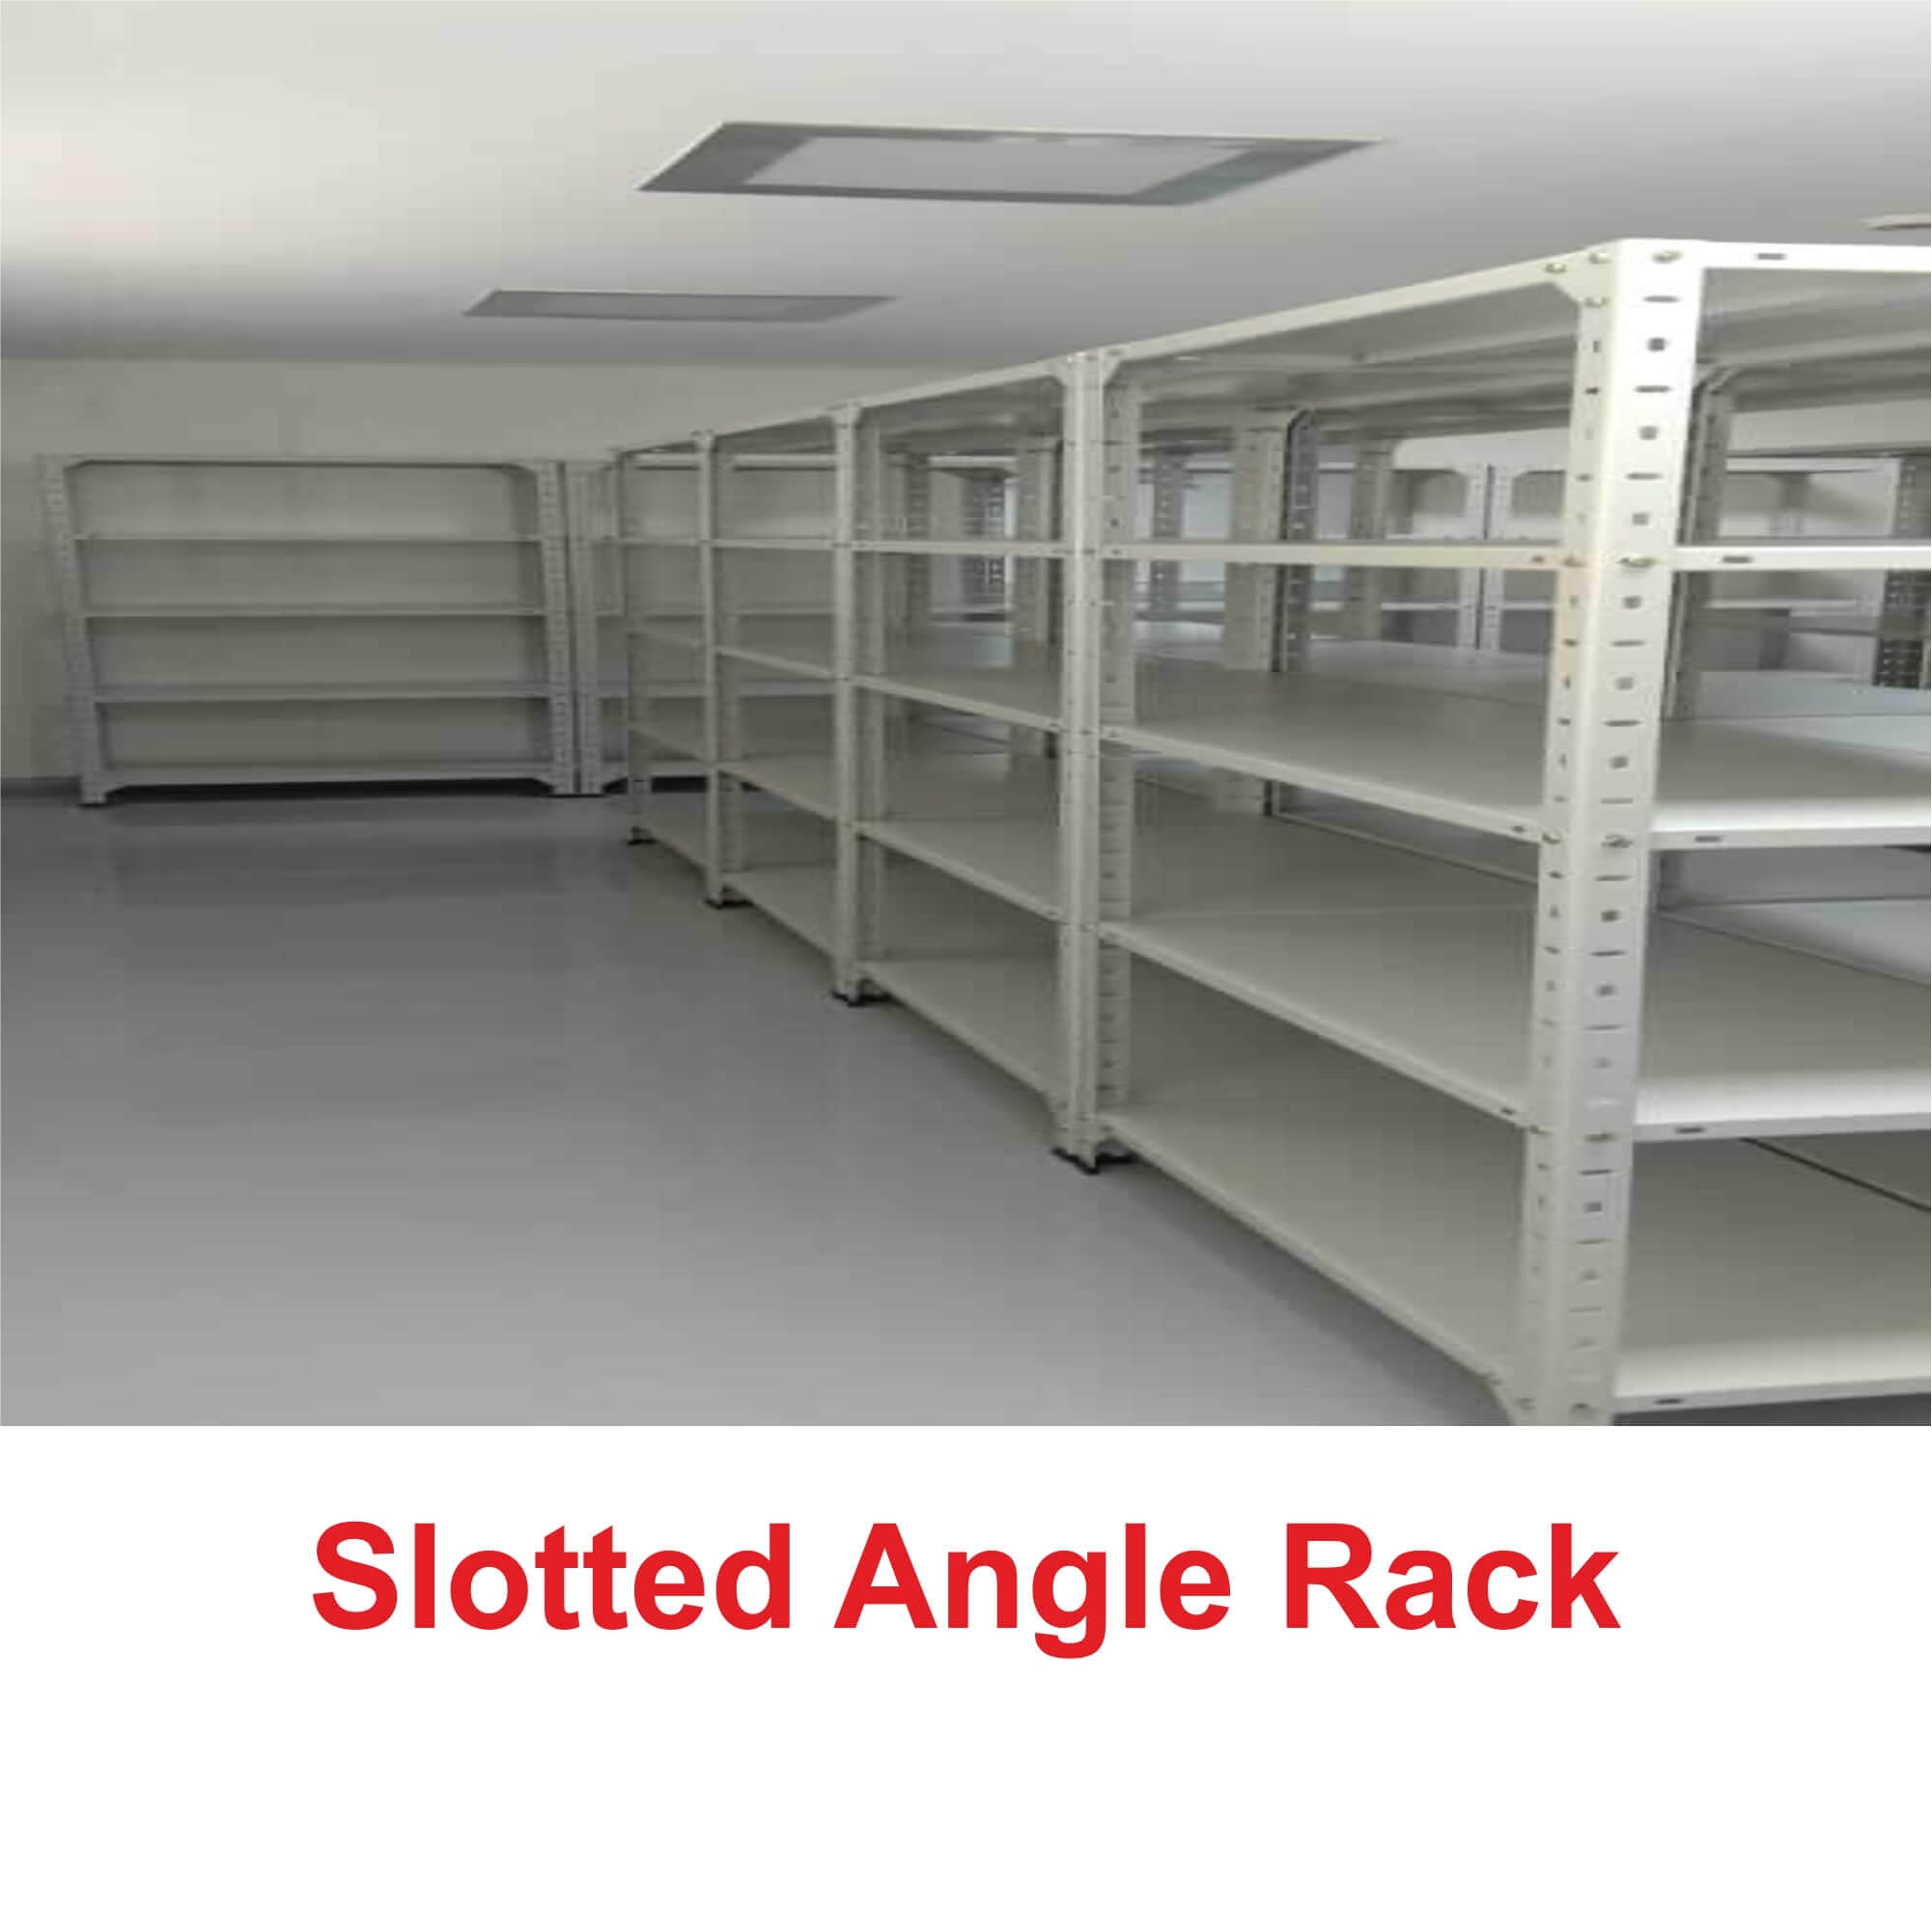 Slotted Angle Rack Manufacturer in India